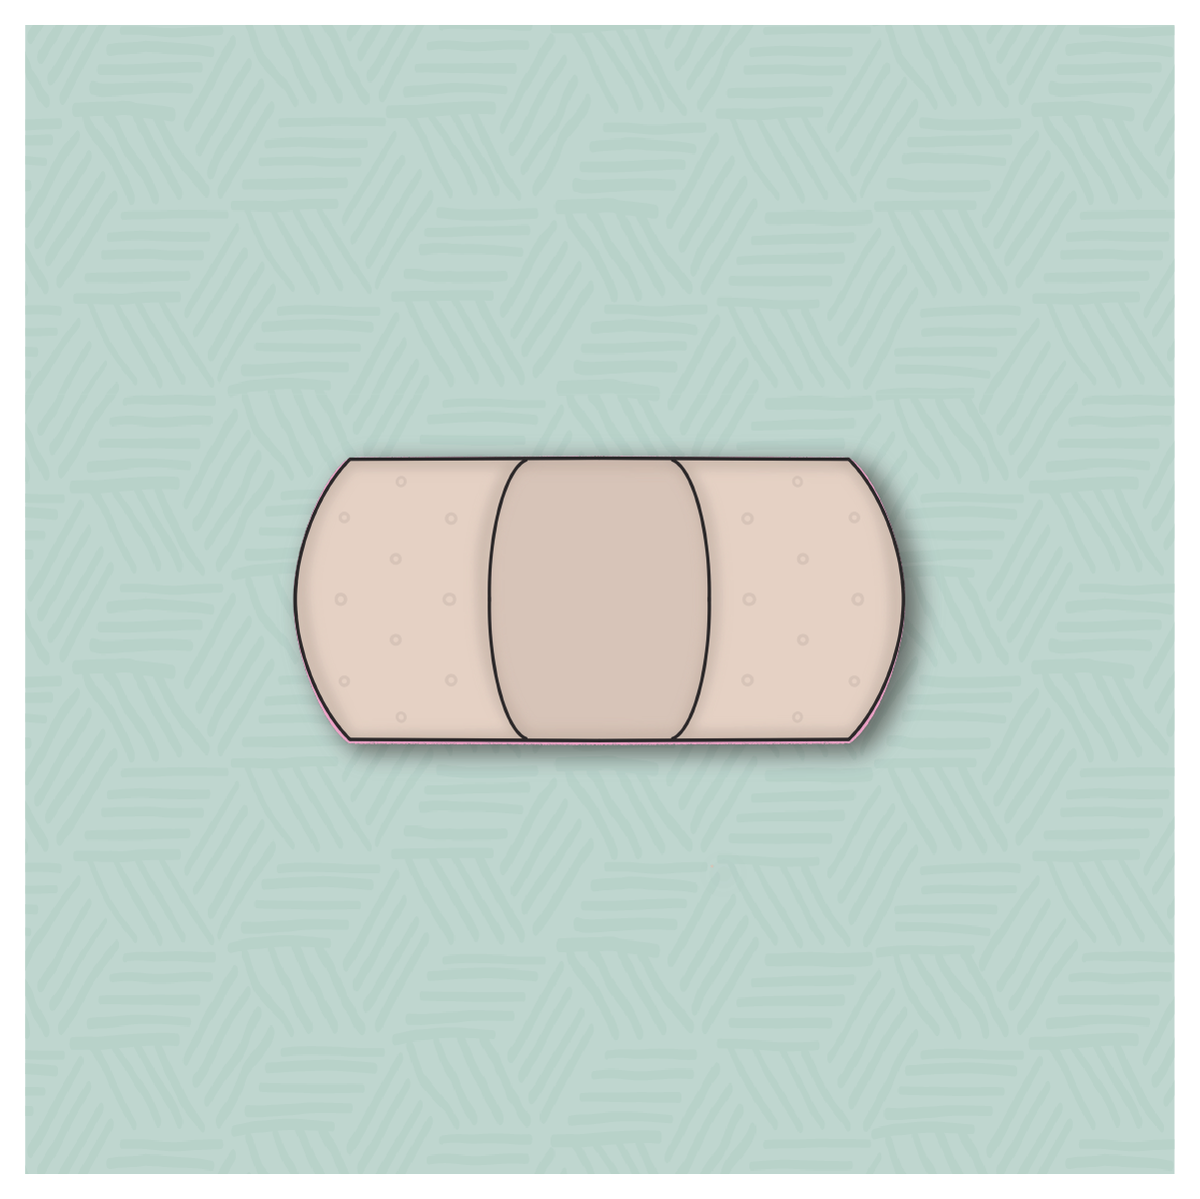 Simple Band-Aid Cookie Cutter